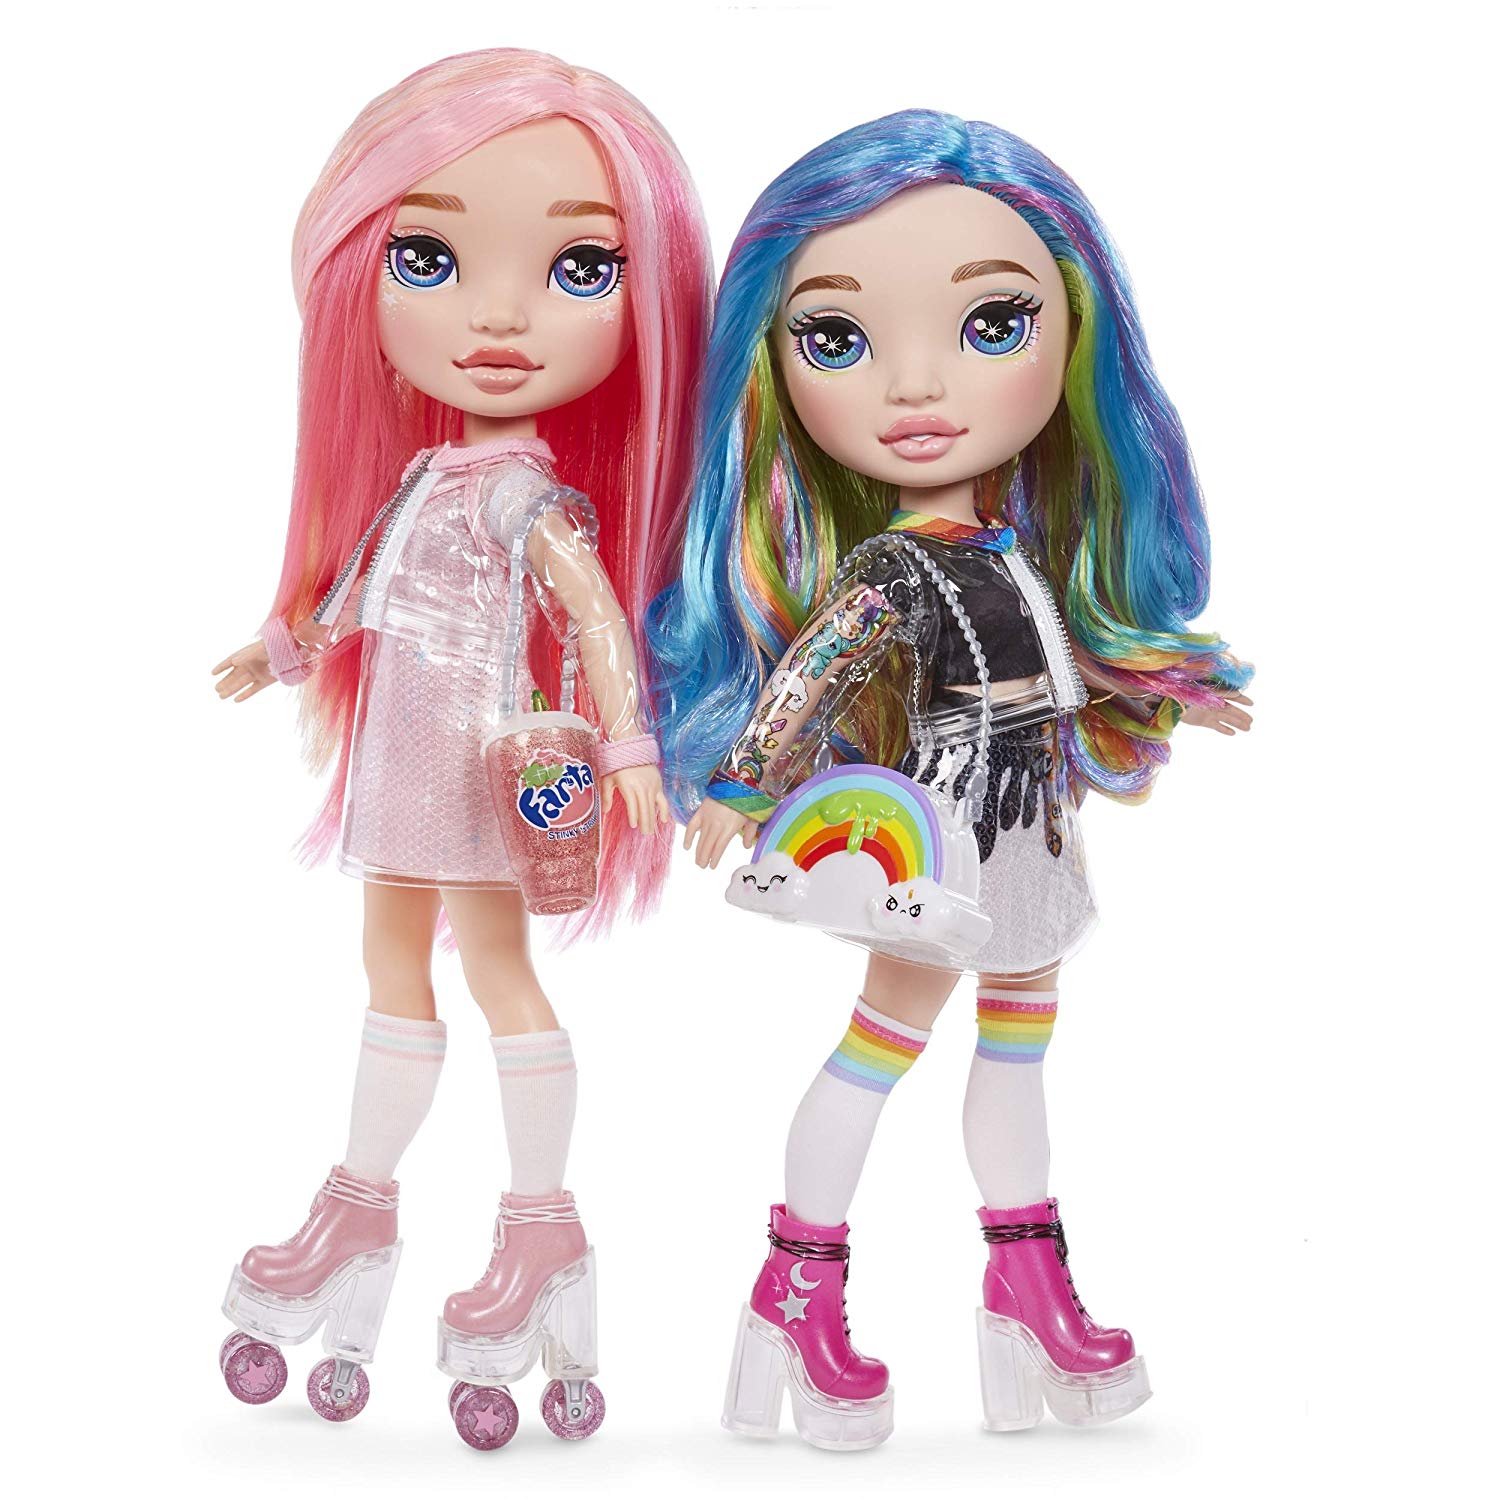 Poopsie Rainbow Surprise dolls with Slime fashion - New big stock